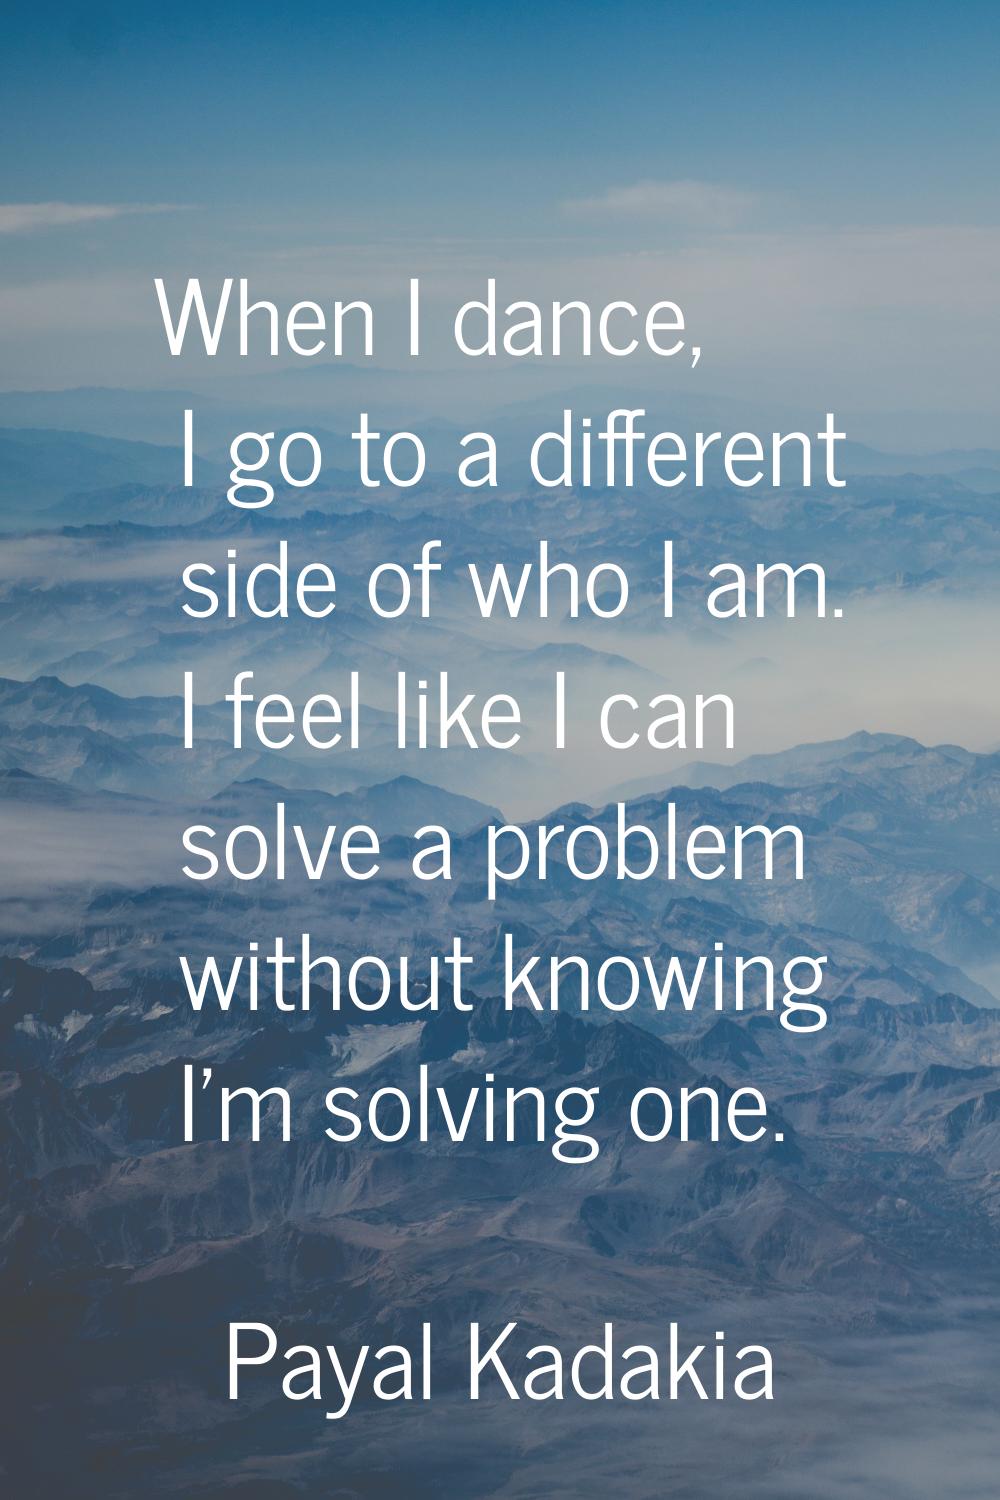 When I dance, I go to a different side of who I am. I feel like I can solve a problem without knowi